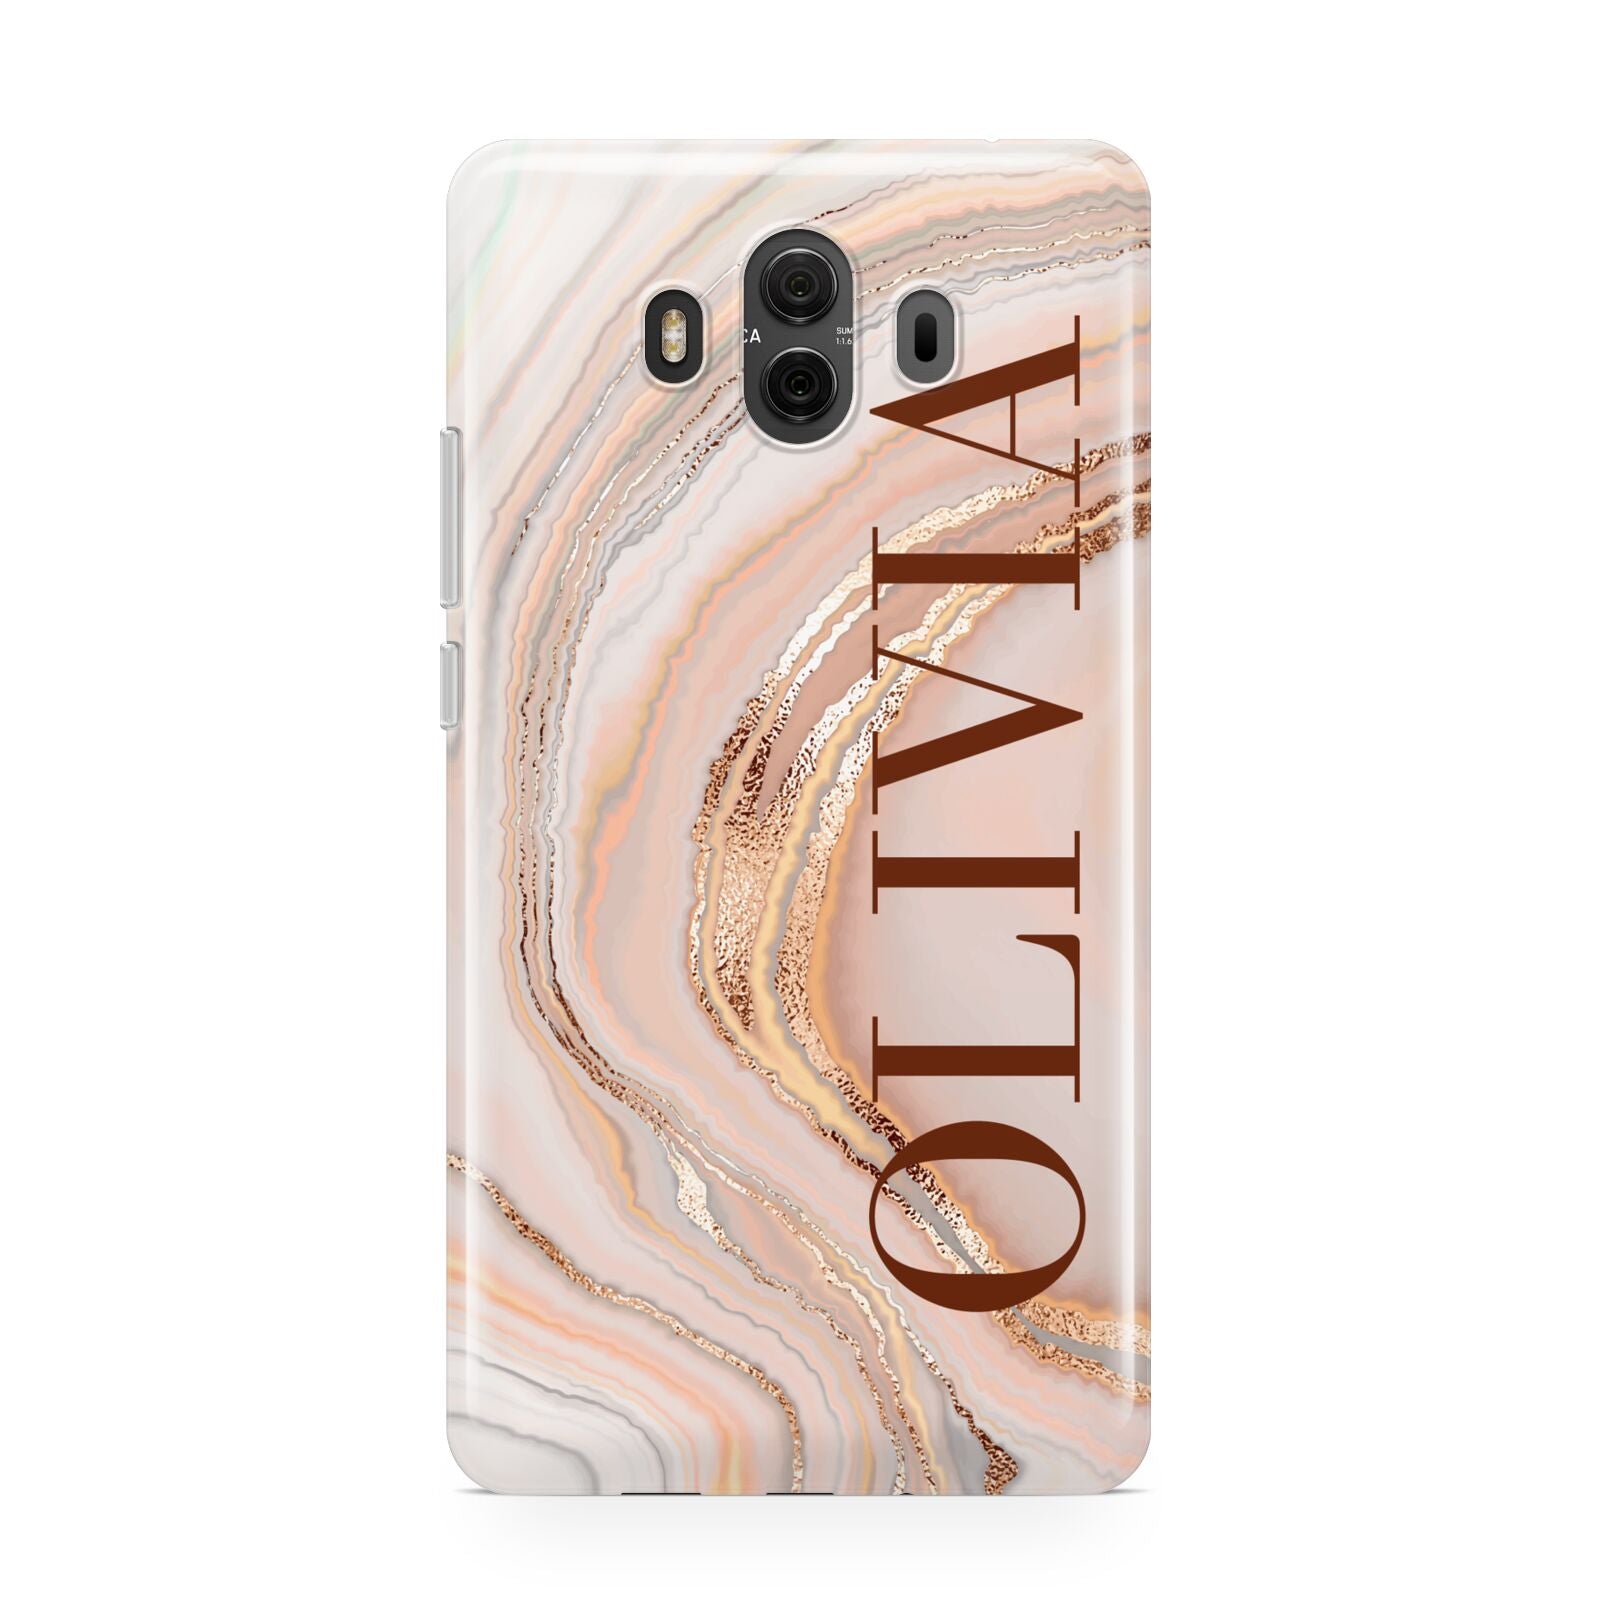 Nude Agate Huawei Mate 10 Protective Phone Case